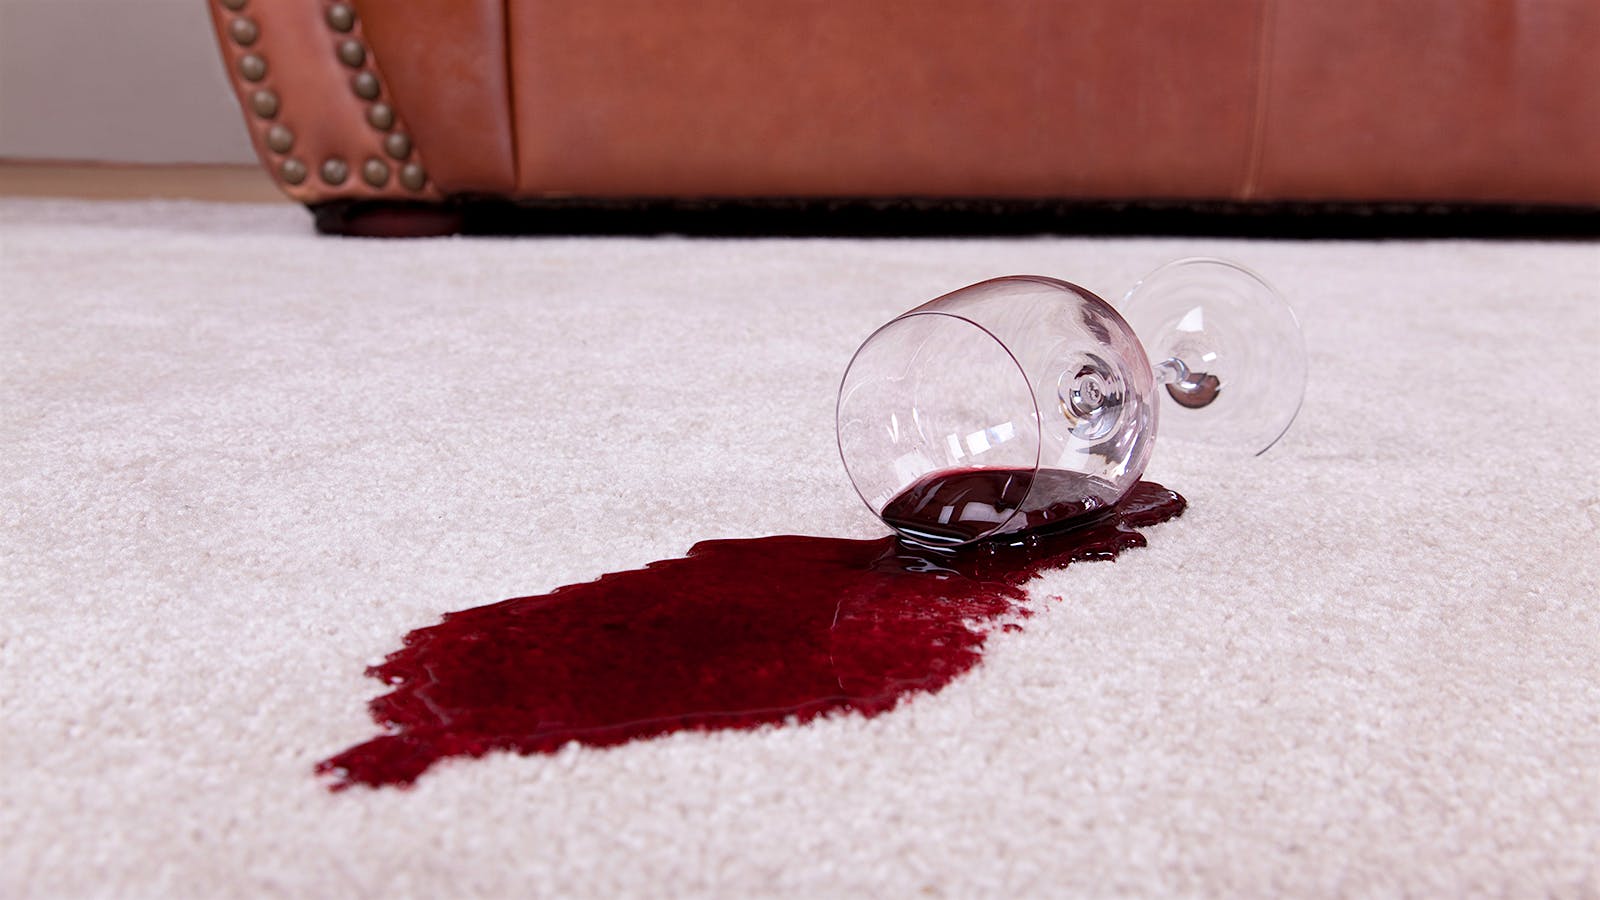 How to Clean Up Spilled Wine and Remove Stains